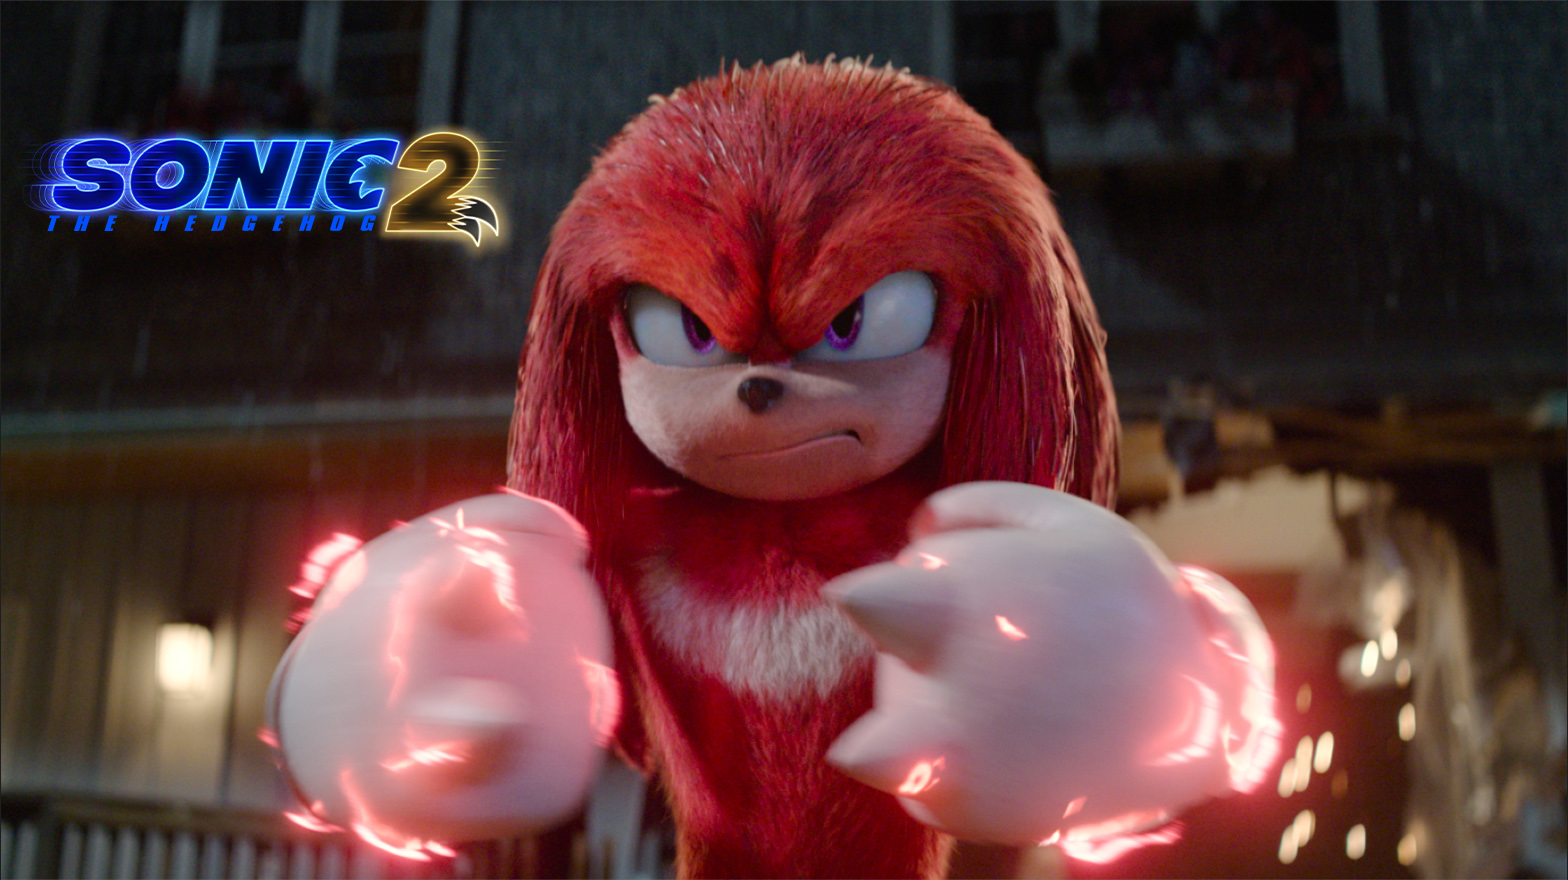 Paramount+ on X: @Nickelodeon #SonicMovie3 is officially in